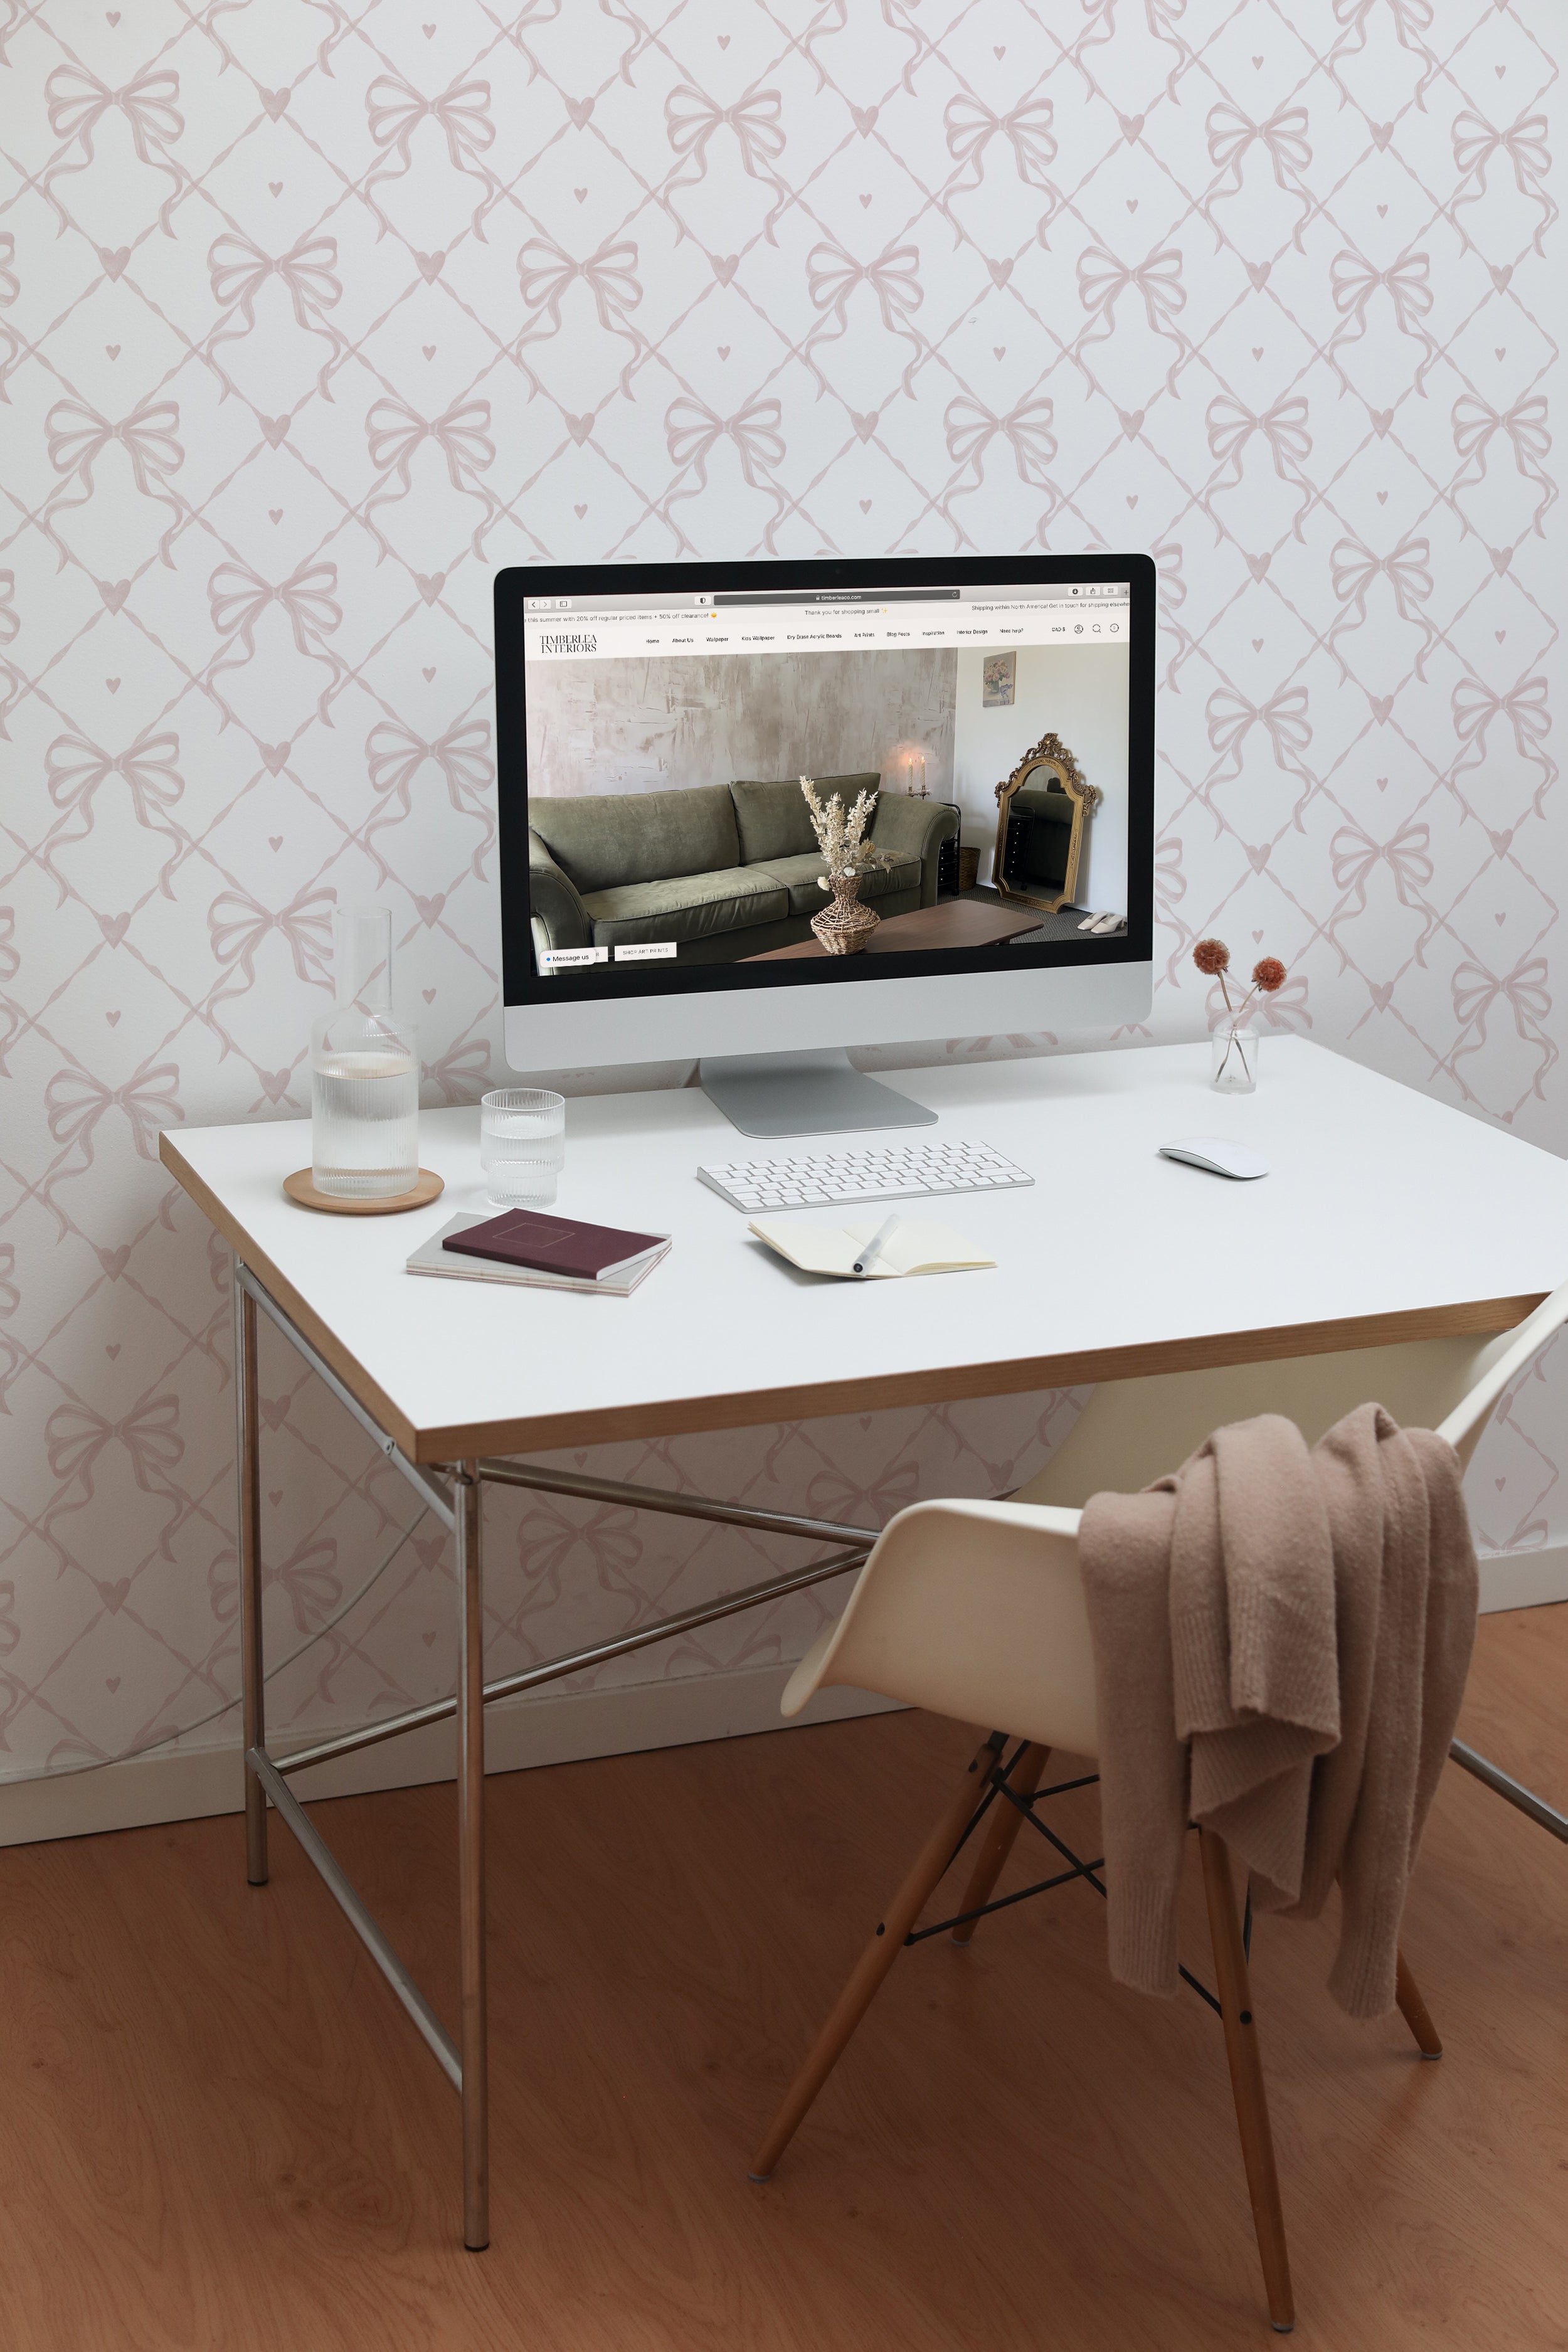 A home office space decorated with Delicate Watercolour Bows Wallpaper. The light and airy bow pattern provides a subtle yet stylish backdrop for a modern white desk and computer setup, enhancing productivity with its clean and calming vibe.